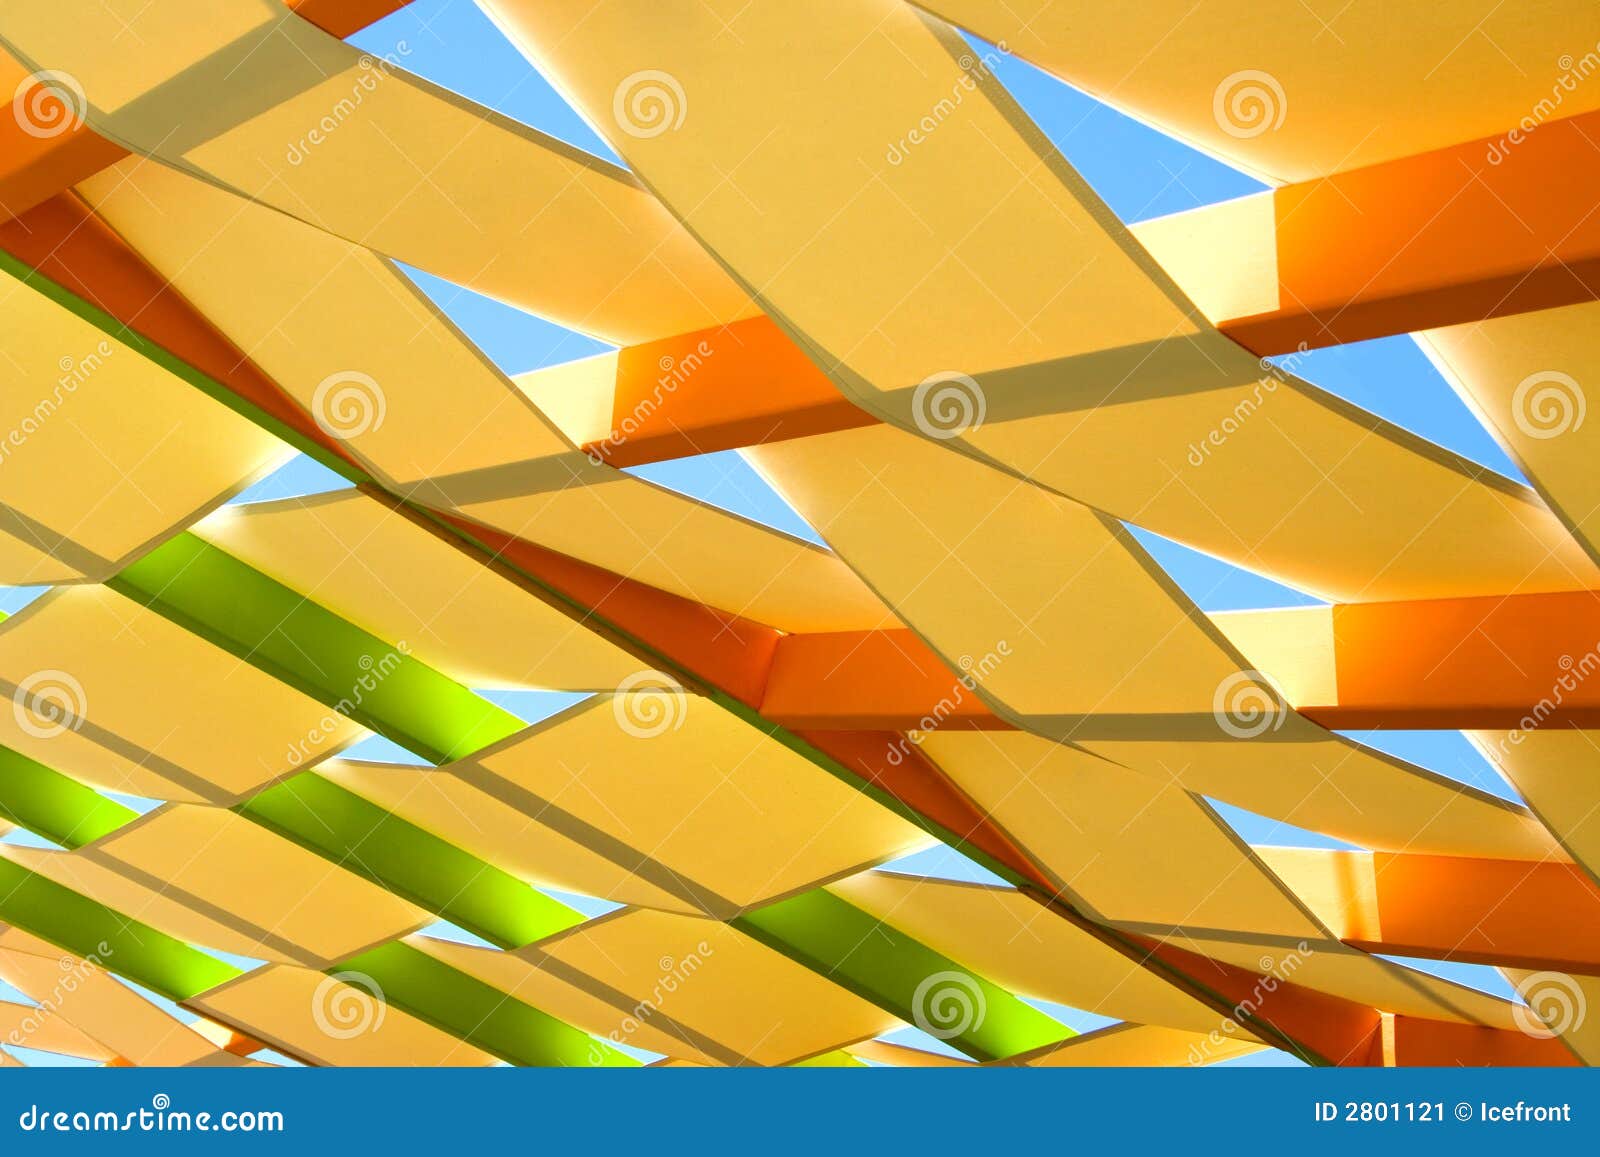 Roof Abstract Stock Image Image Of Exterior Roof Structure 2801121